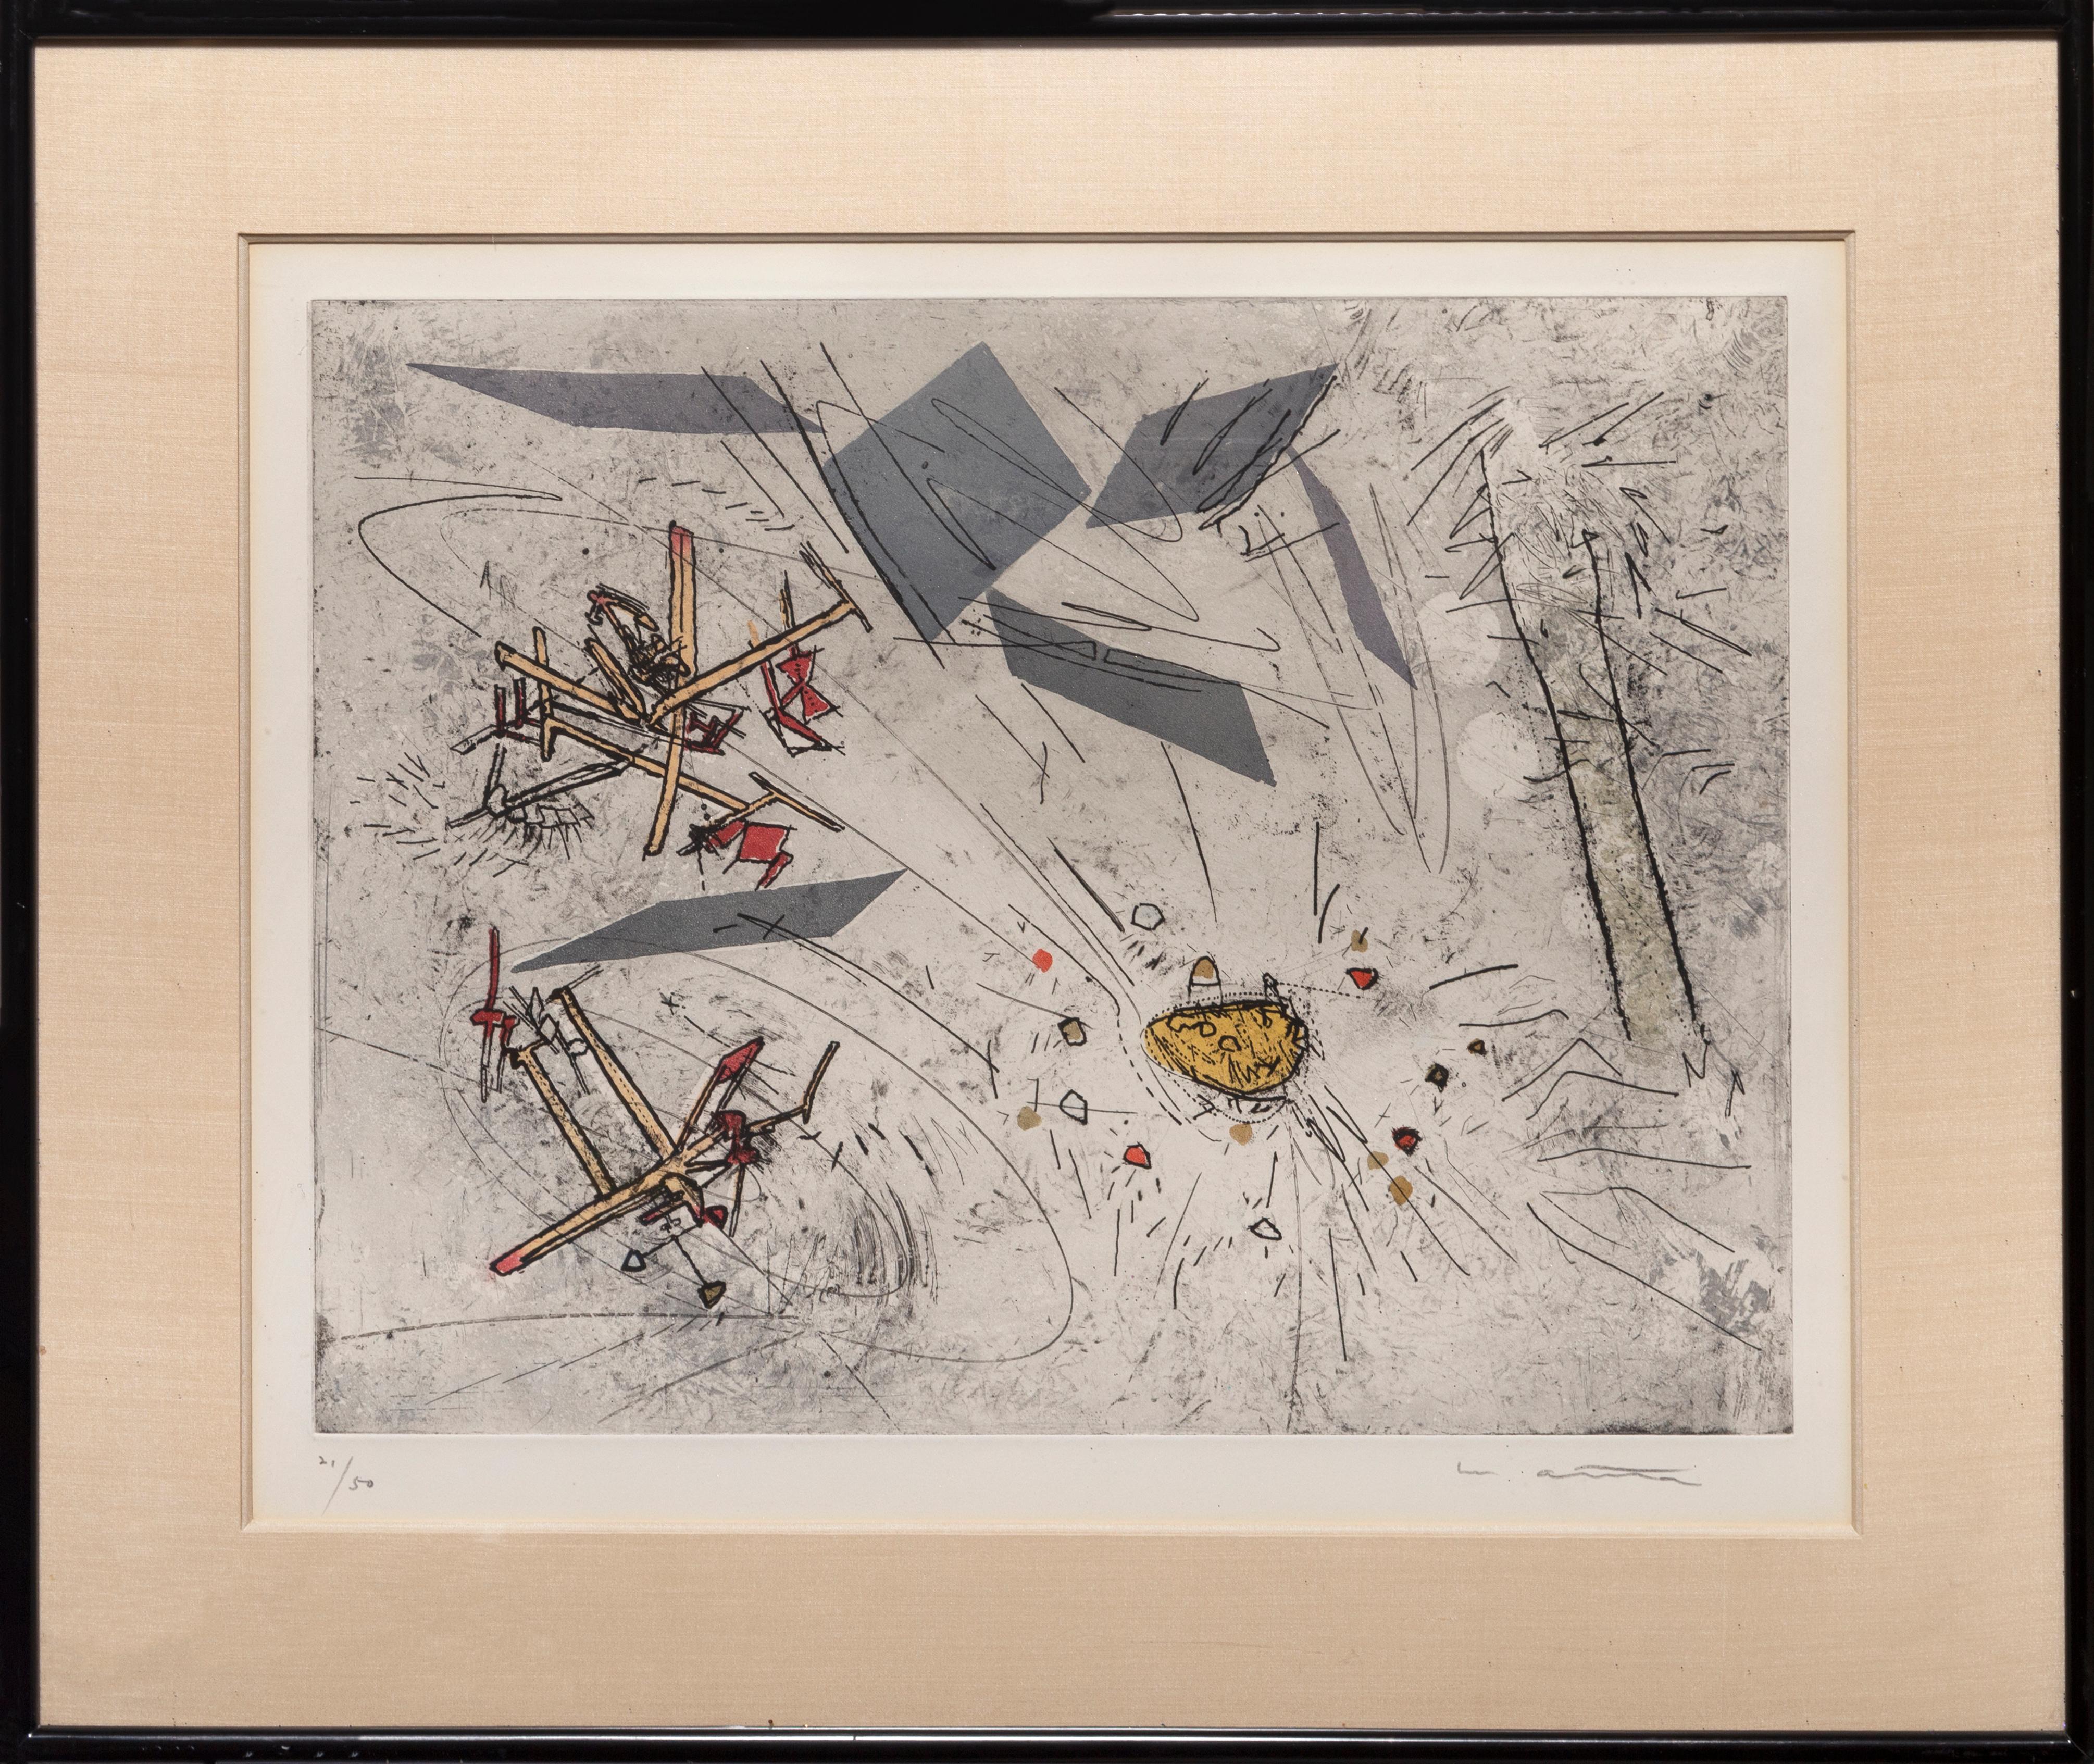 Cosmicstrip III by Roberto Matta, Chilean (1911–2002)
Date: 1959
Etching, signed and numbered in pencil
Edition of 21/50
Image Size: 14.75 x 19.25 inches
Frame Size: 23.75 x 28 inches
Printer: Atelier Georges Visat
Publisher: Editions Allan Frumkin